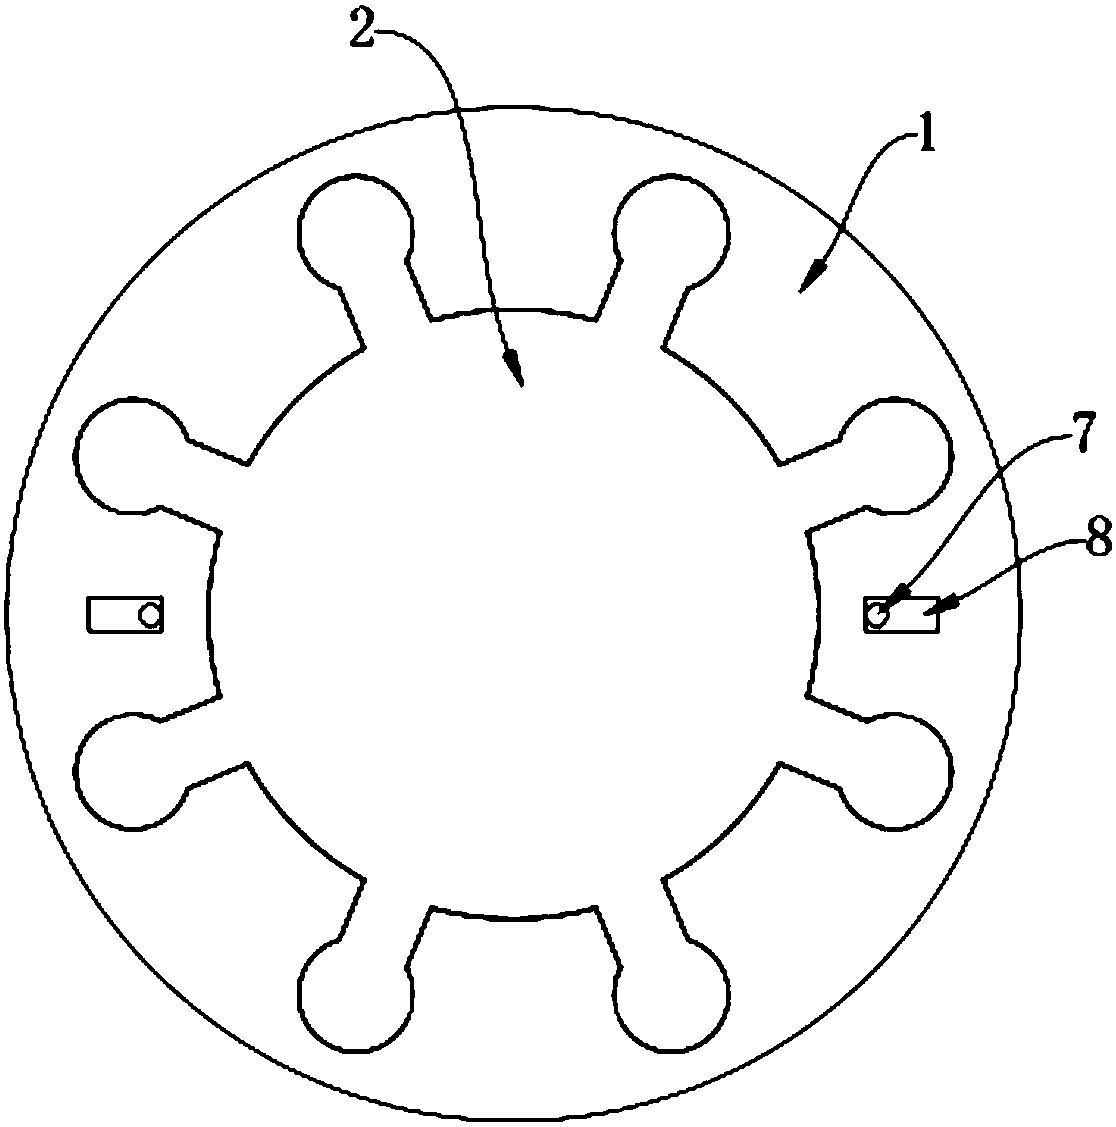 Connecting structure for motor output shaft and rotary shaft